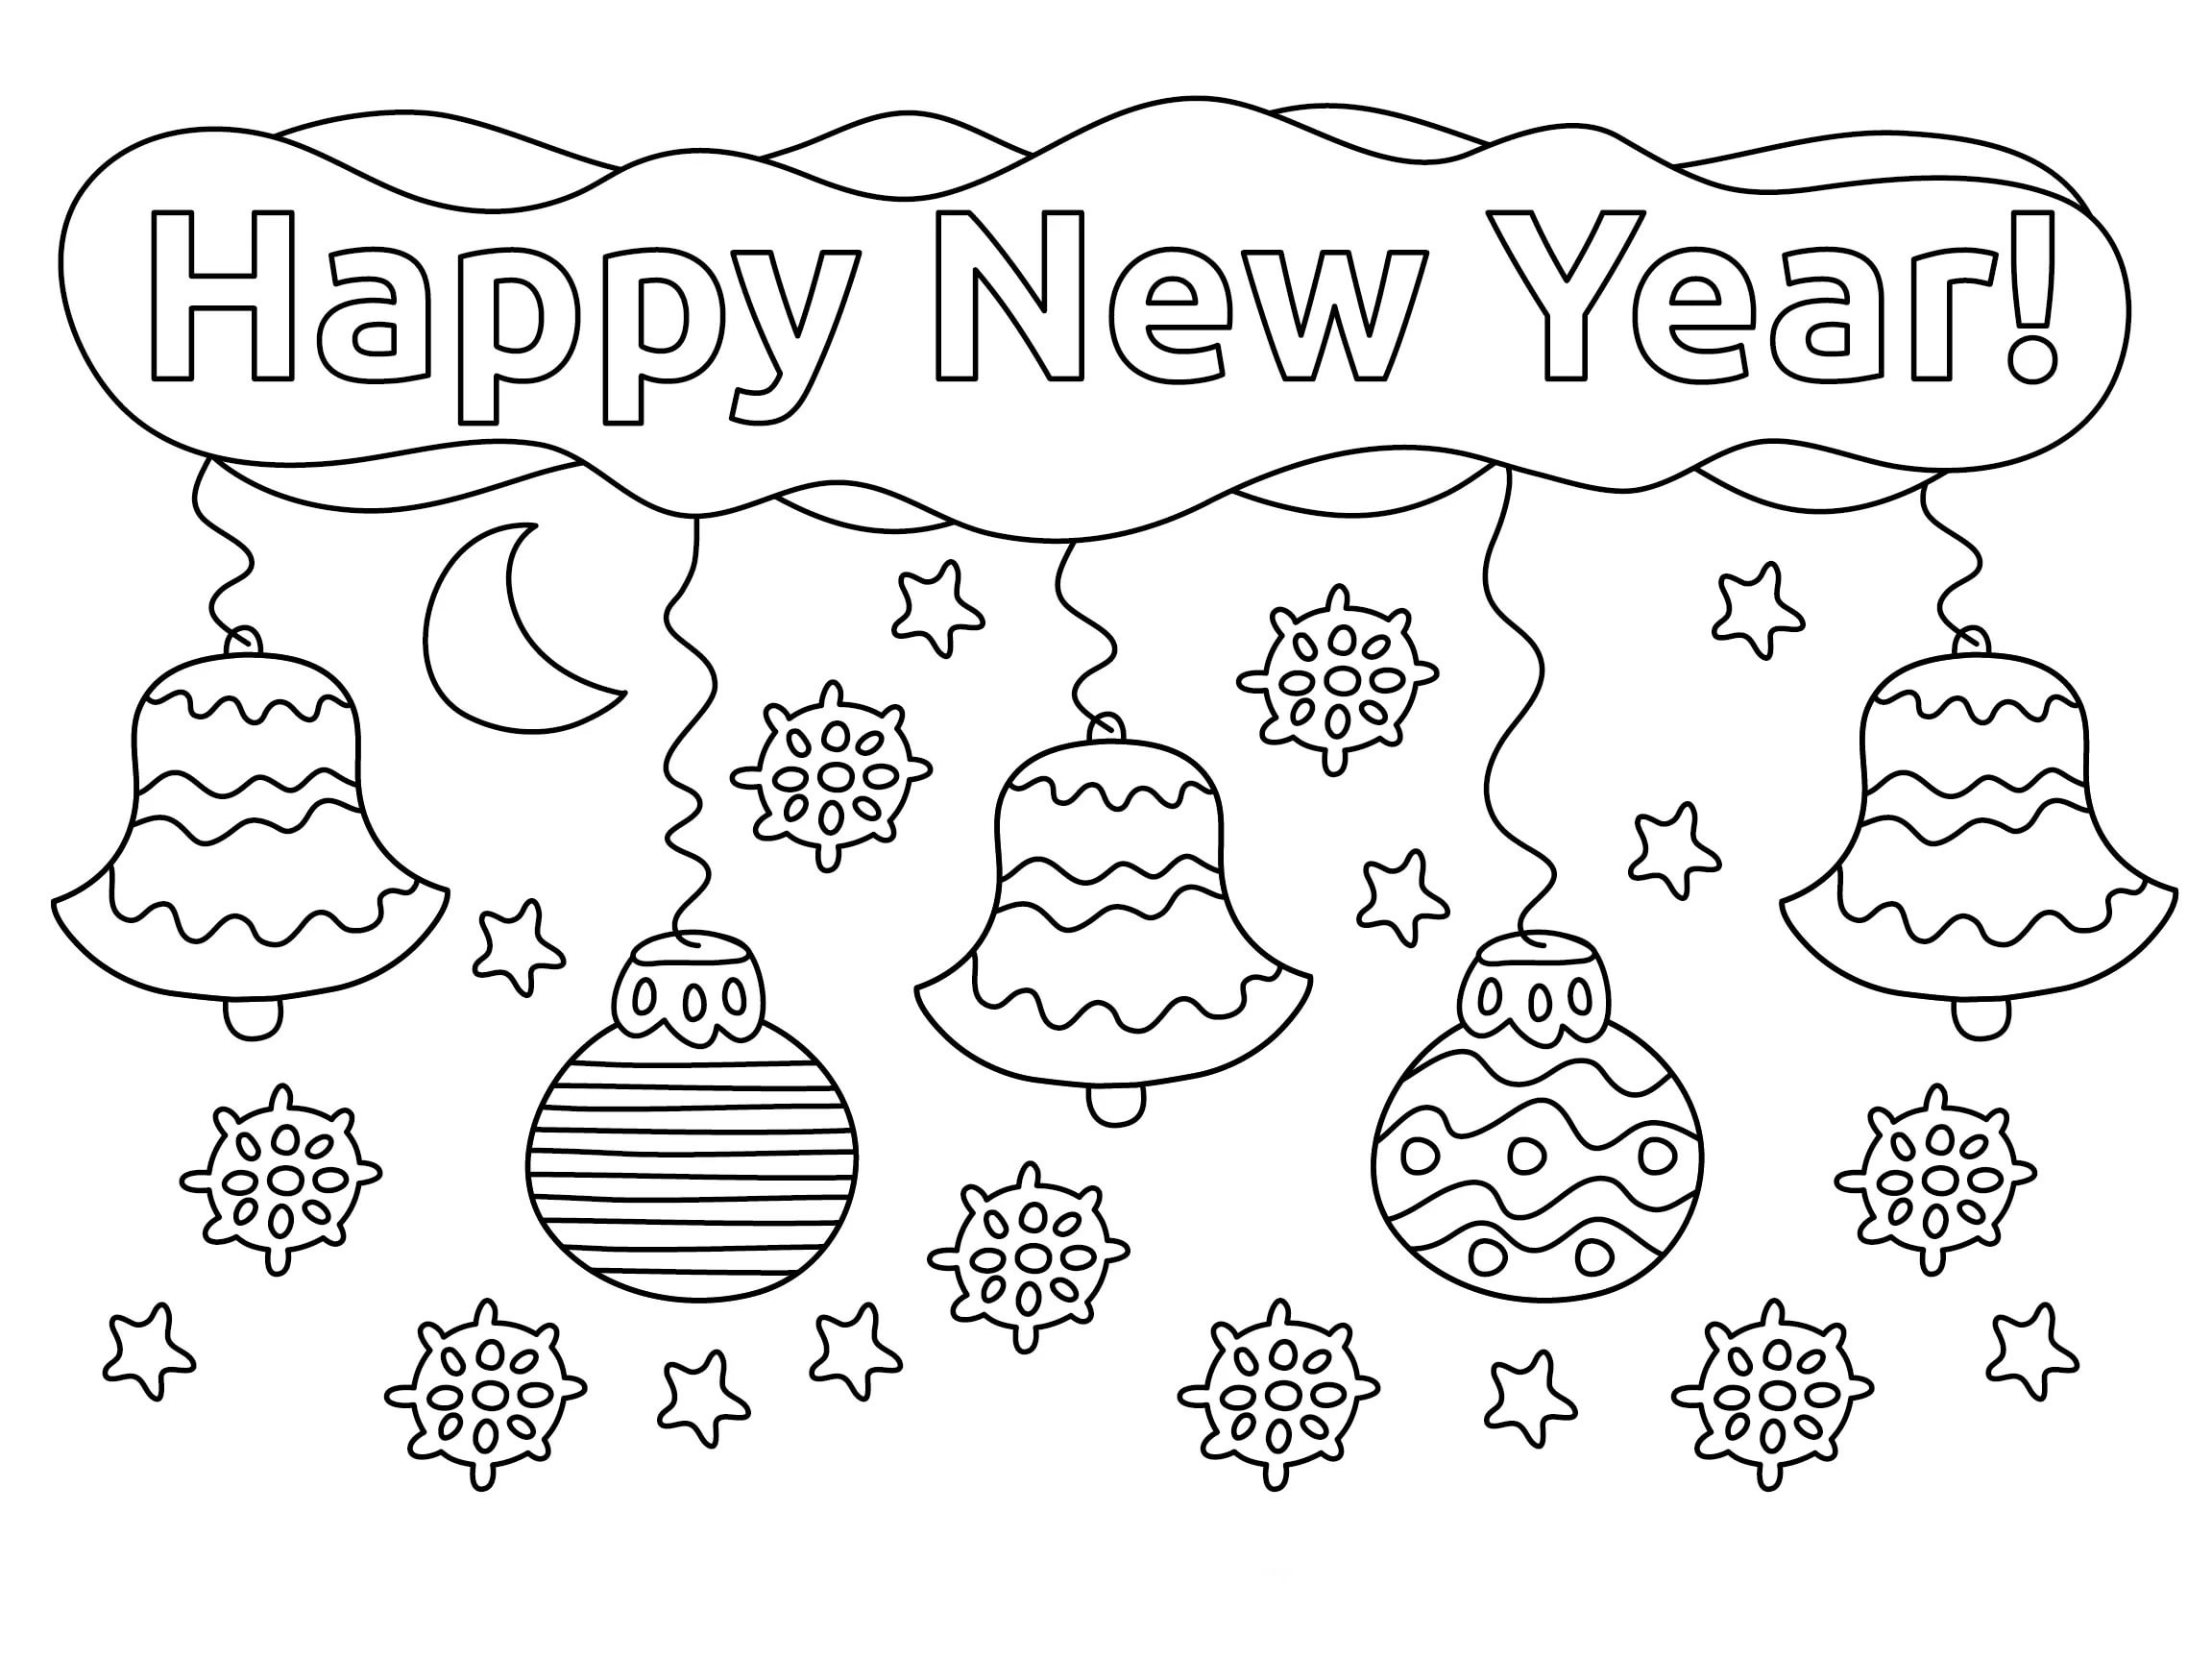 Happy New Year Coloring Pages. 160 New Greeting Cards Coloring Pages